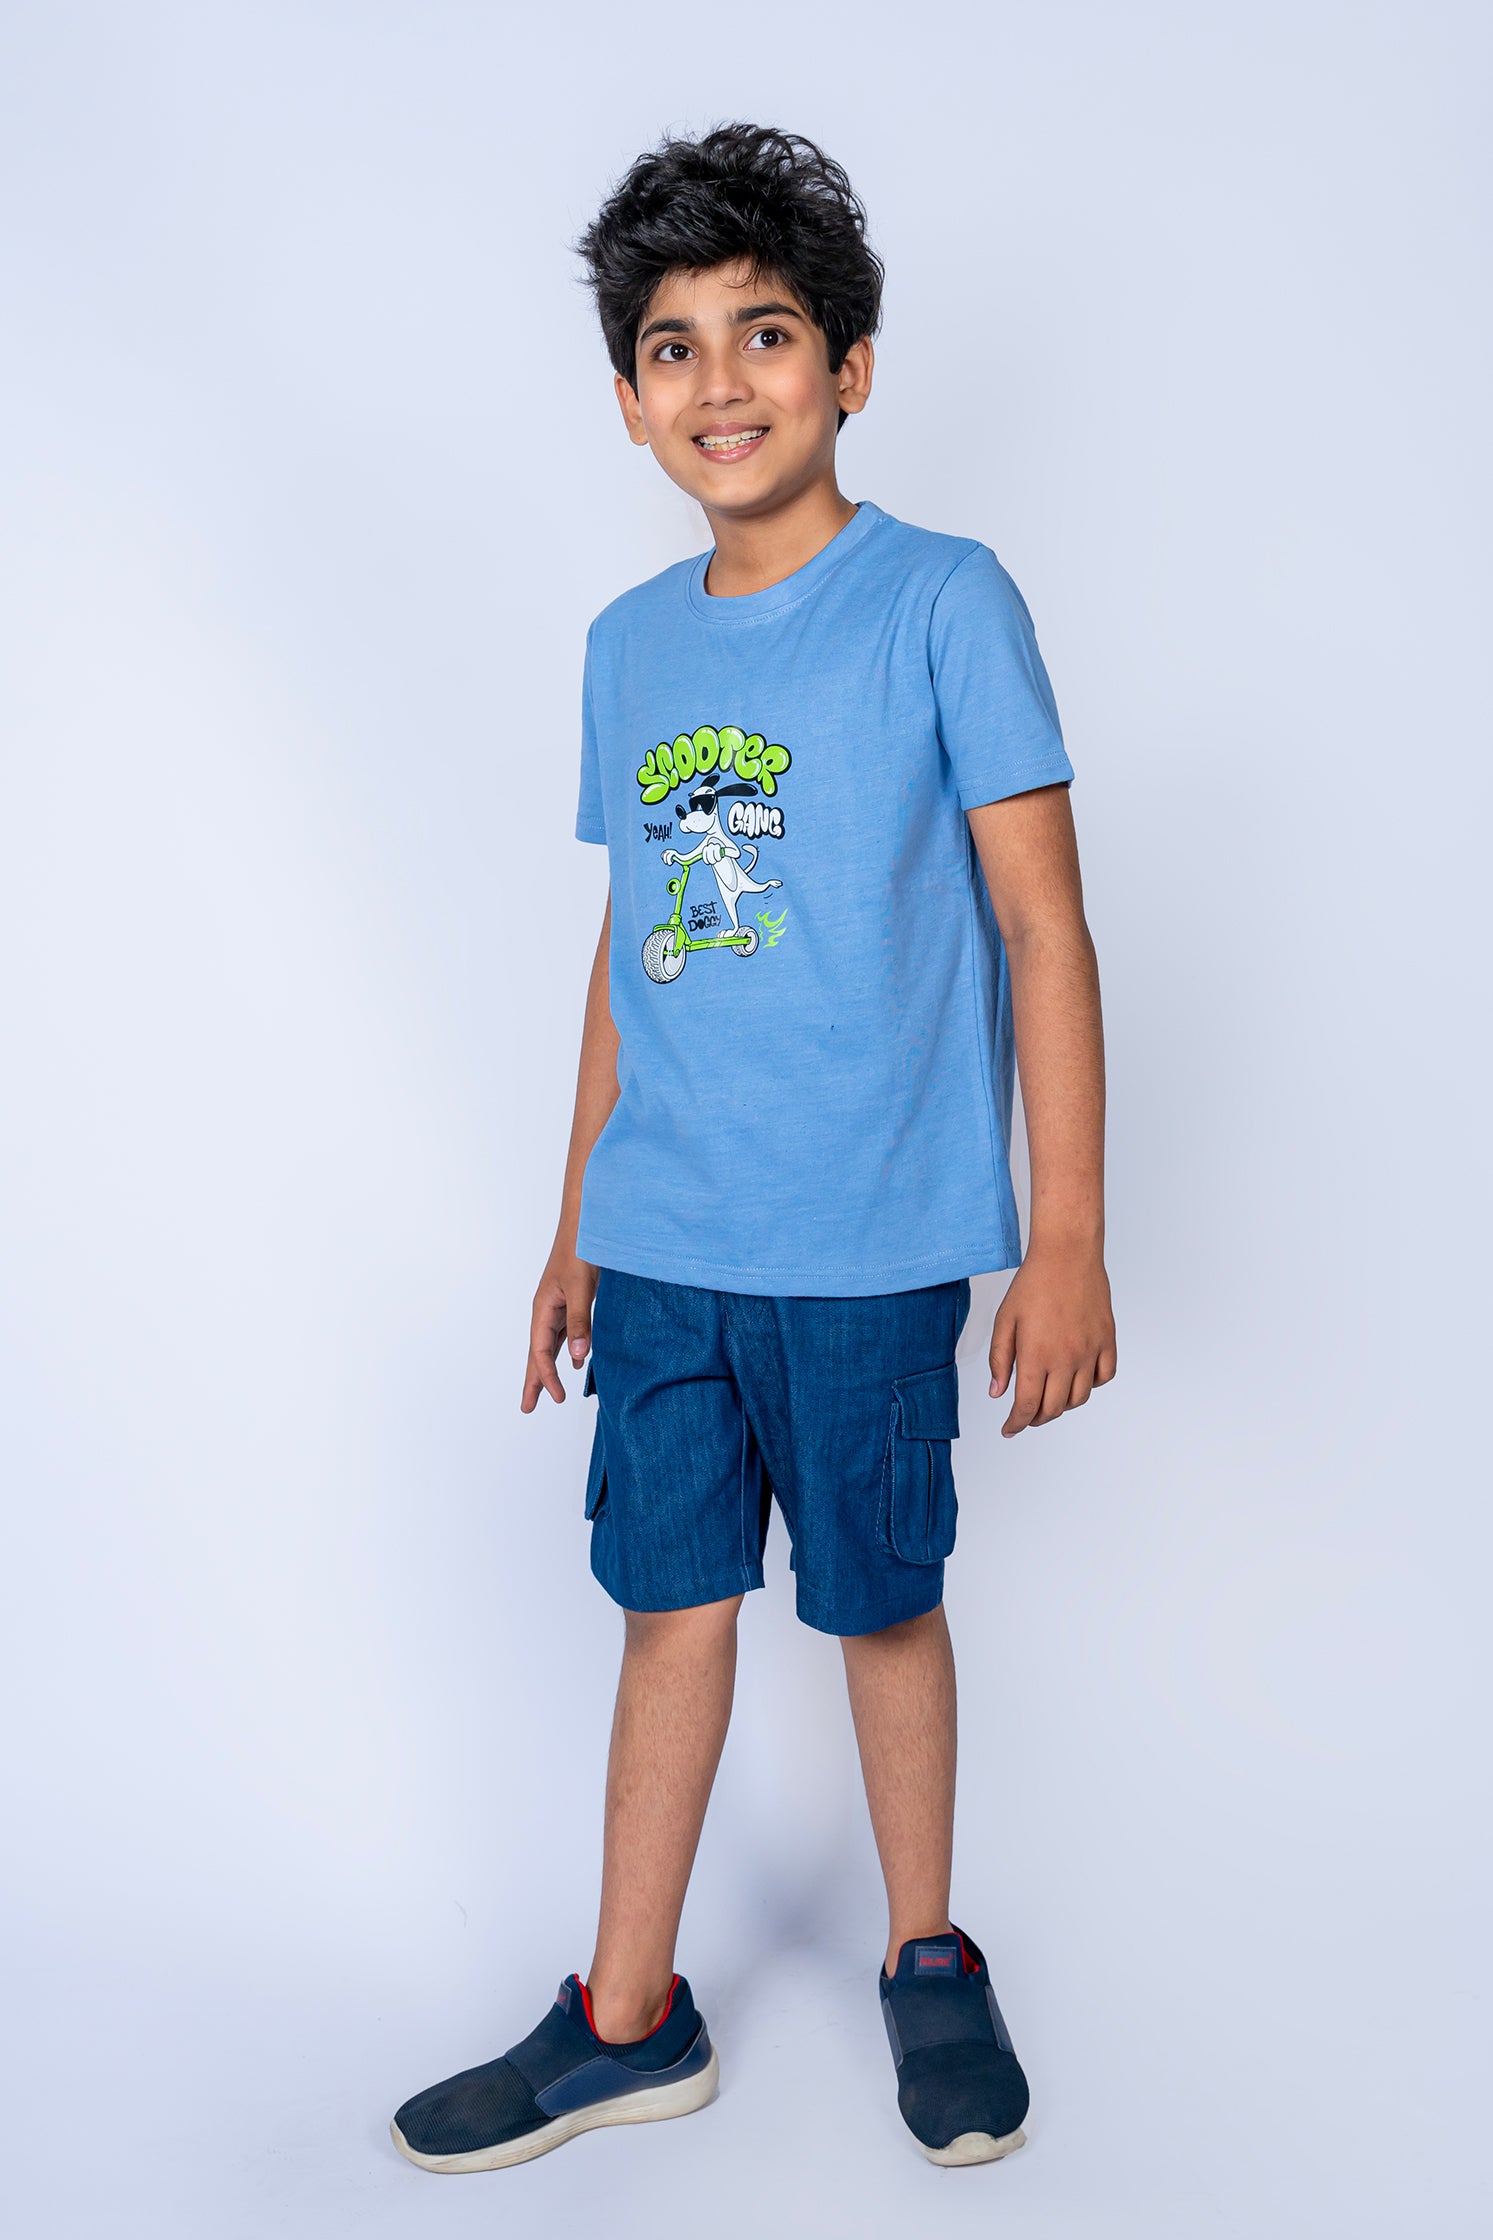 BOYS T-SHIRT NAVY WIHT FRONT "SCOOTER" PRINTING